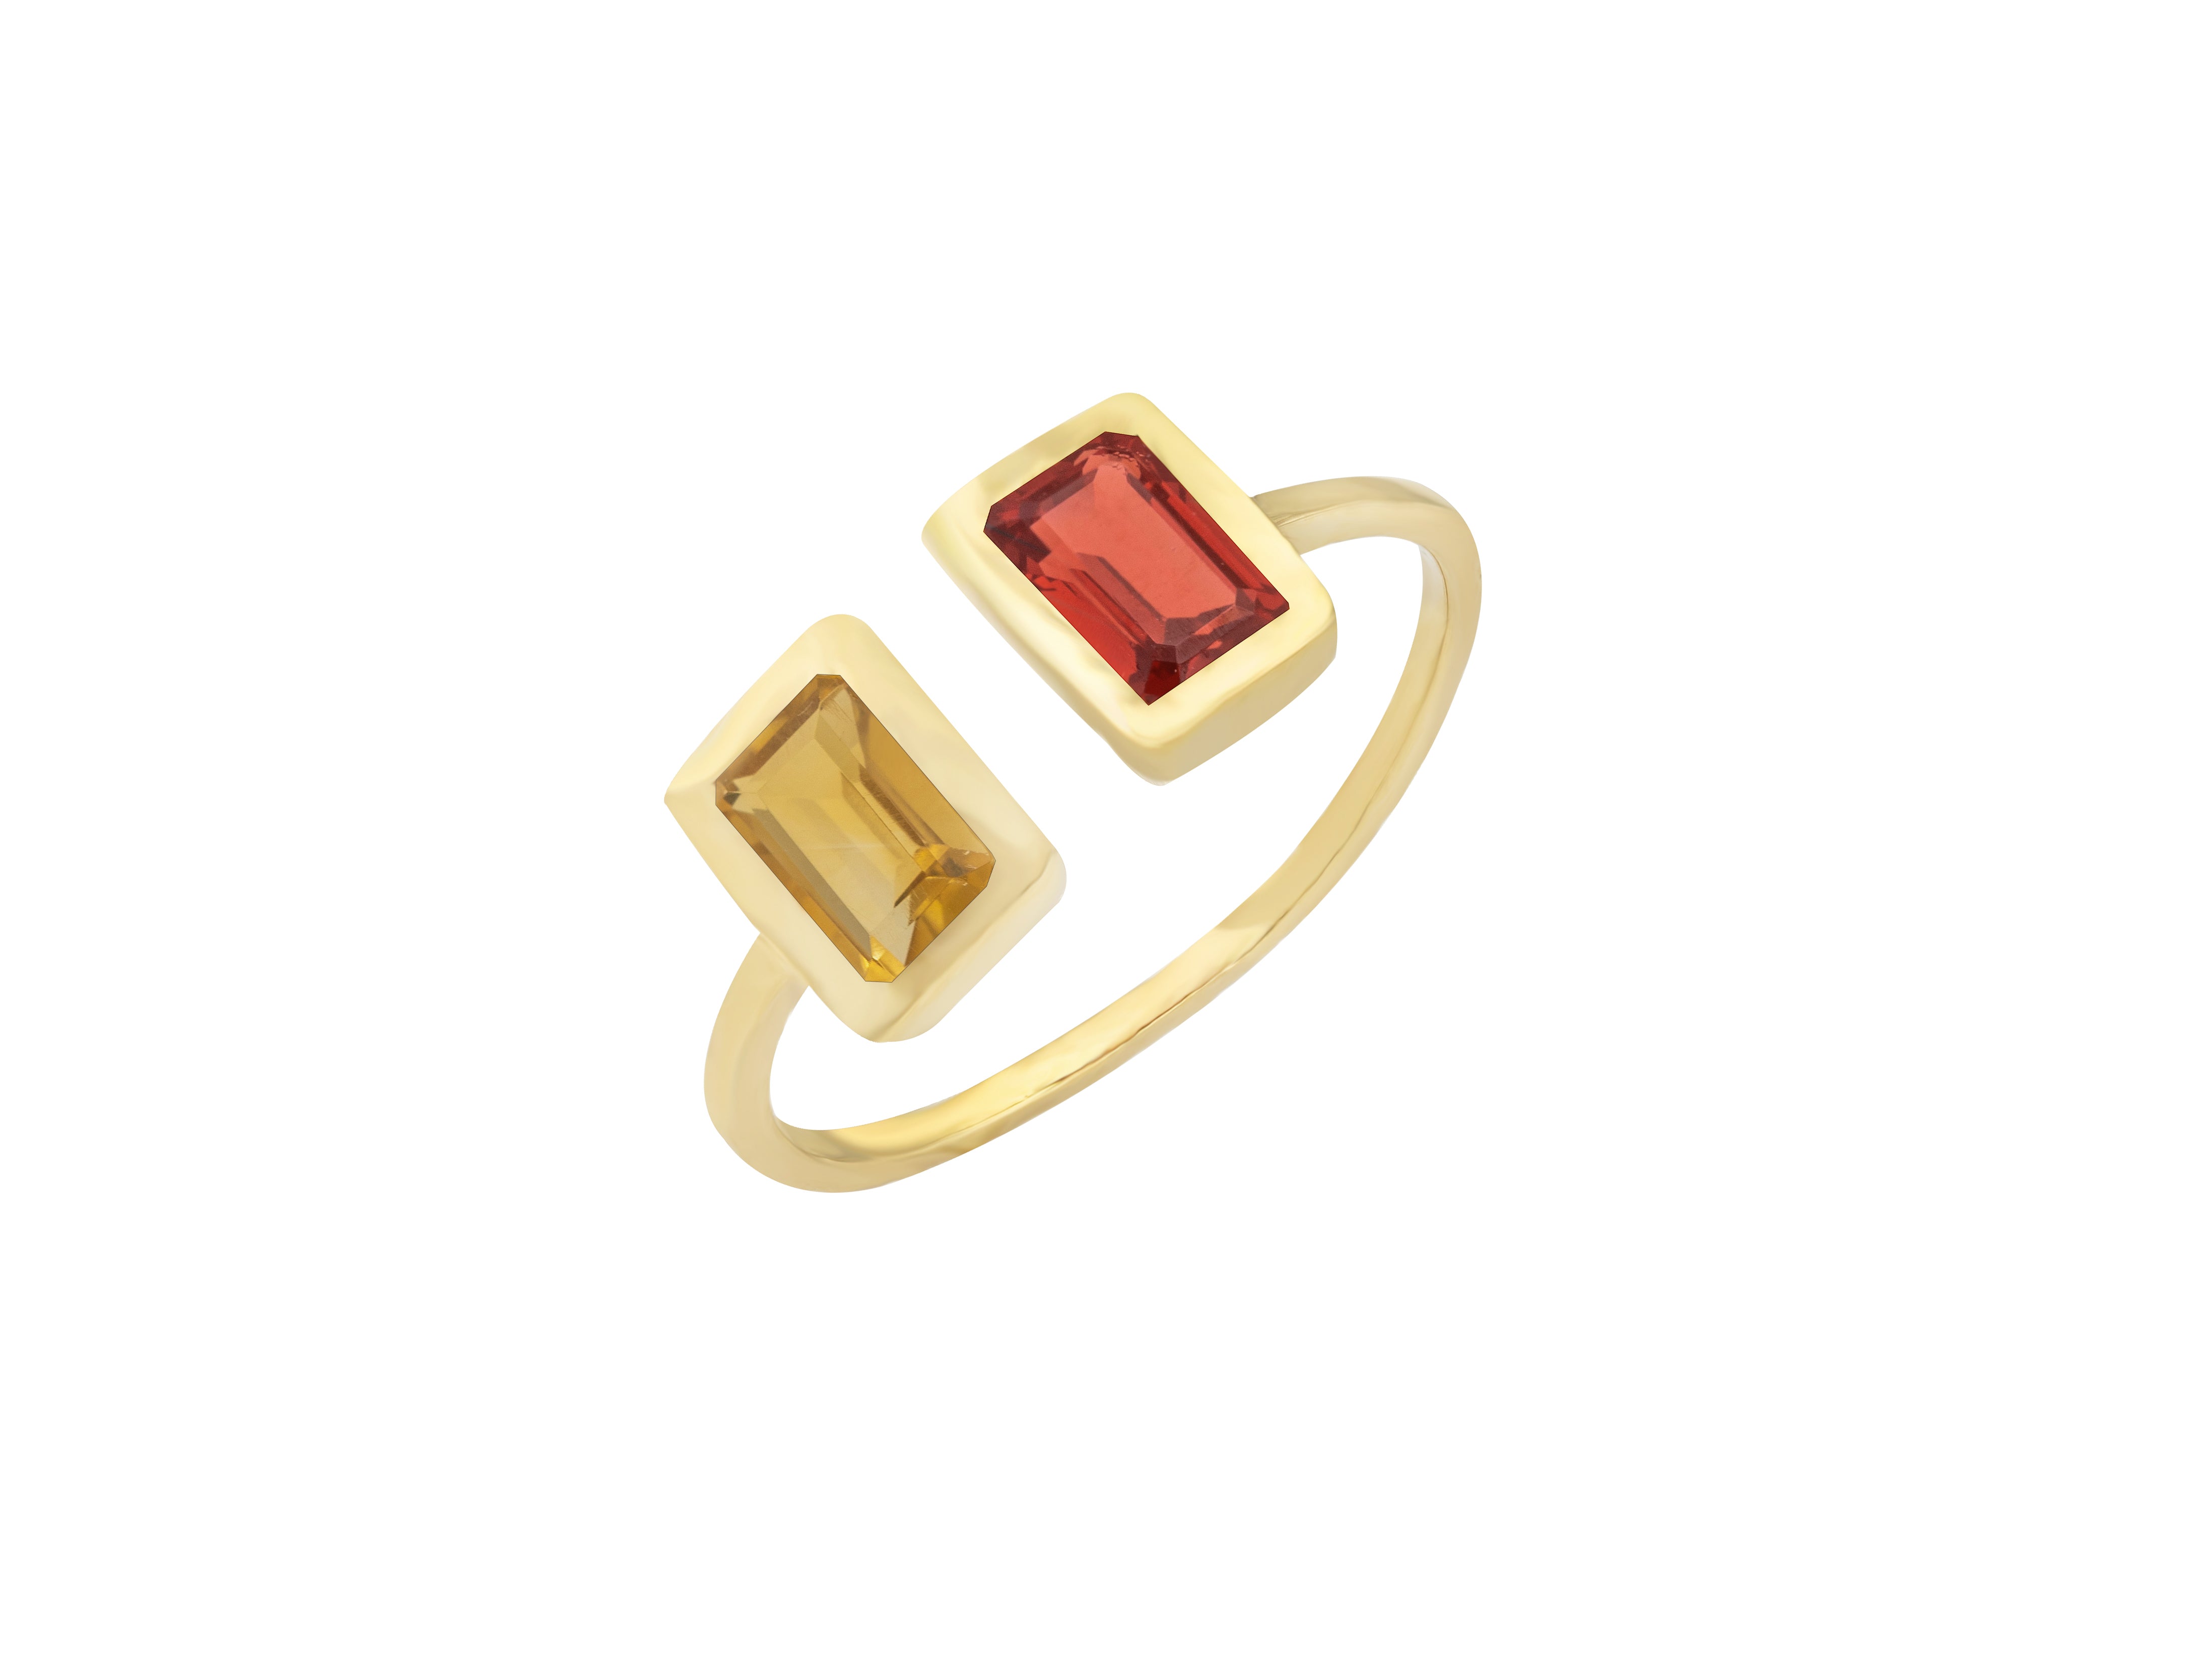 Open Gap Ring in 18K Yellow Gold